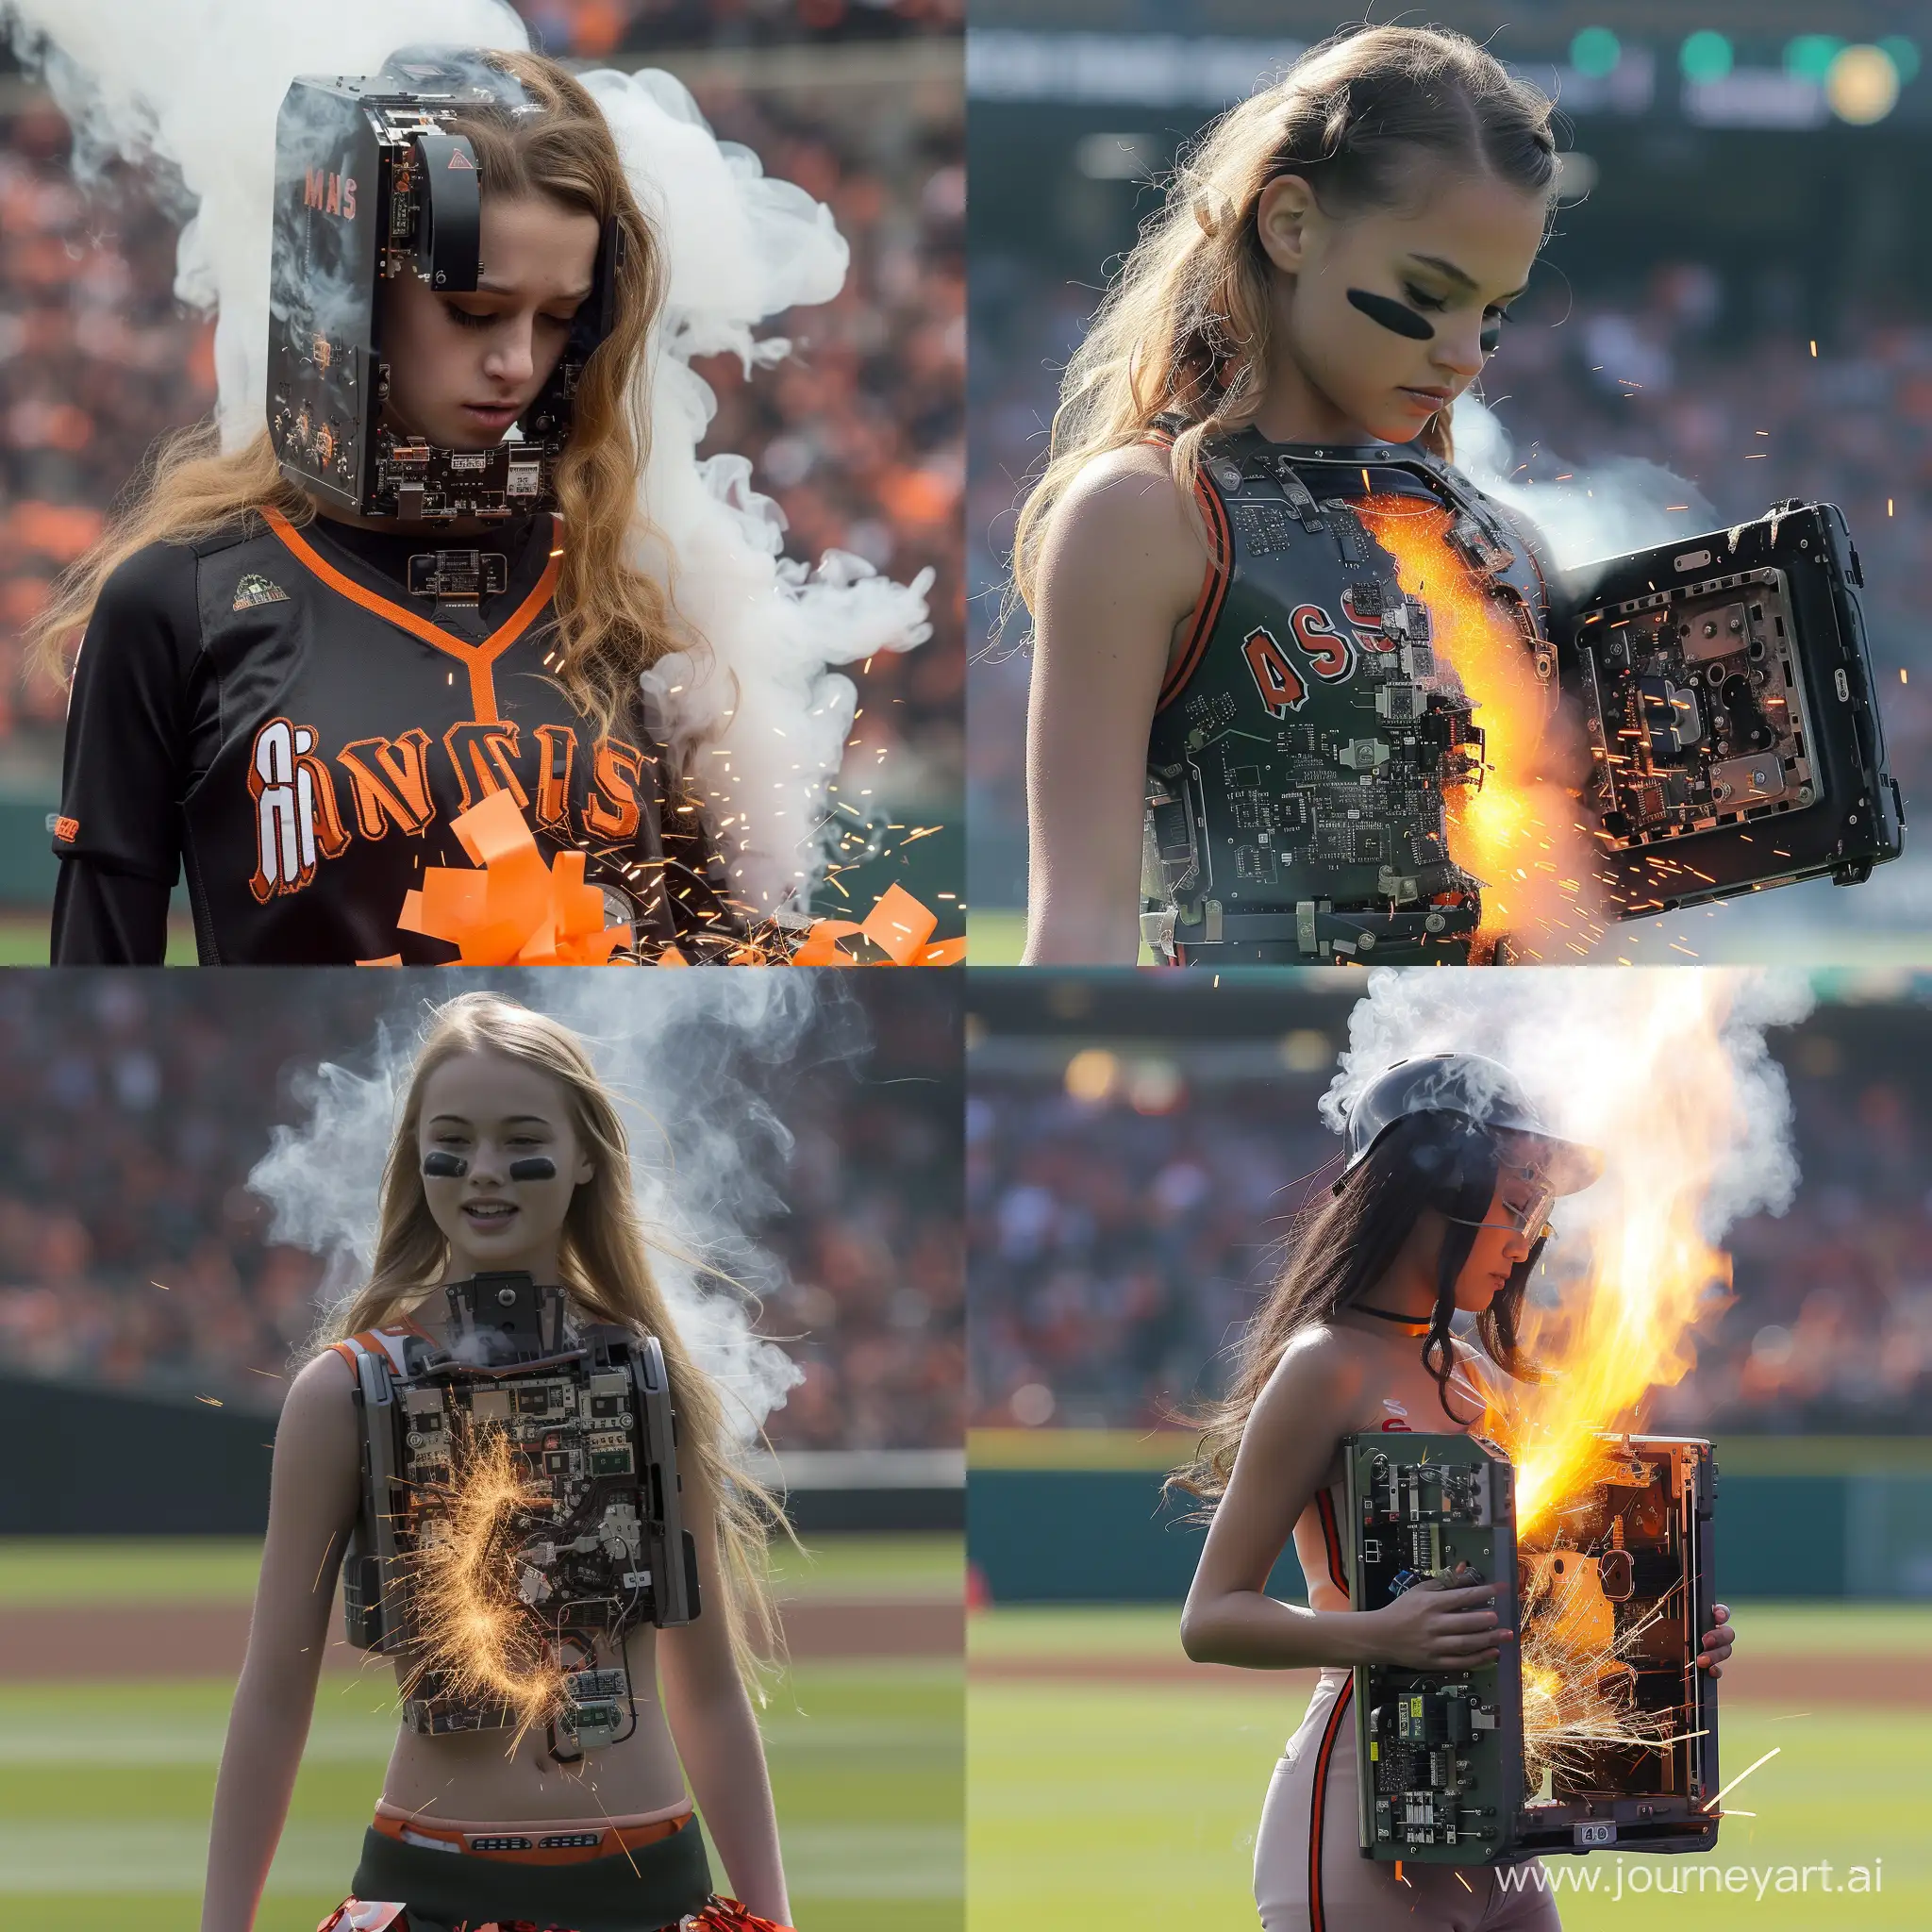 San Francisco Giants 13-14 year old cheerleader, turns out to be a robot, malfunctioning, panel open revealing inner circuitry, smoke and sparks coming out of her, almost shut down